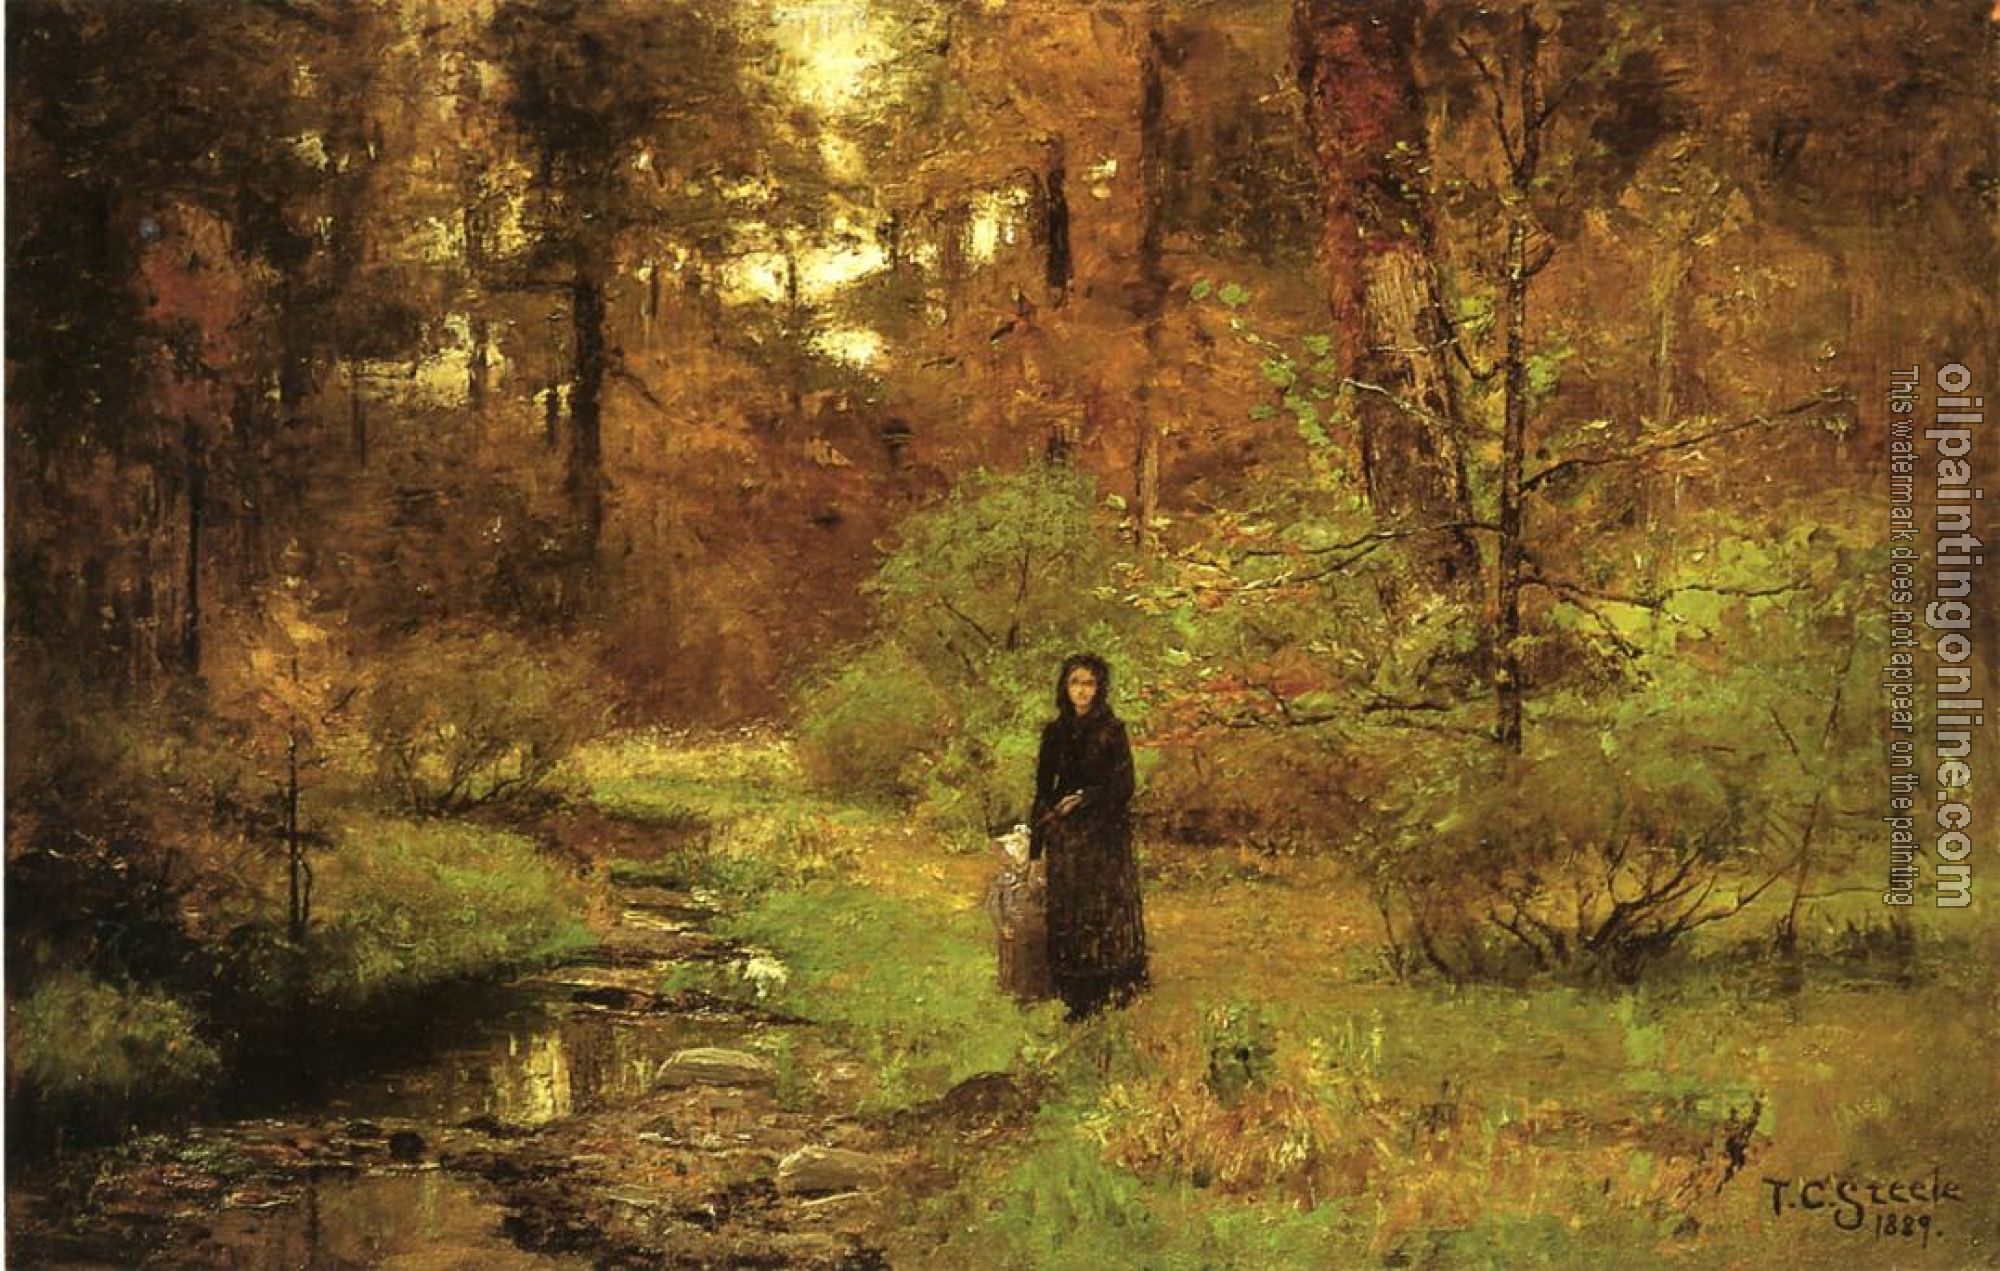 Steele, Theodore Clement - The Brook in the Woods